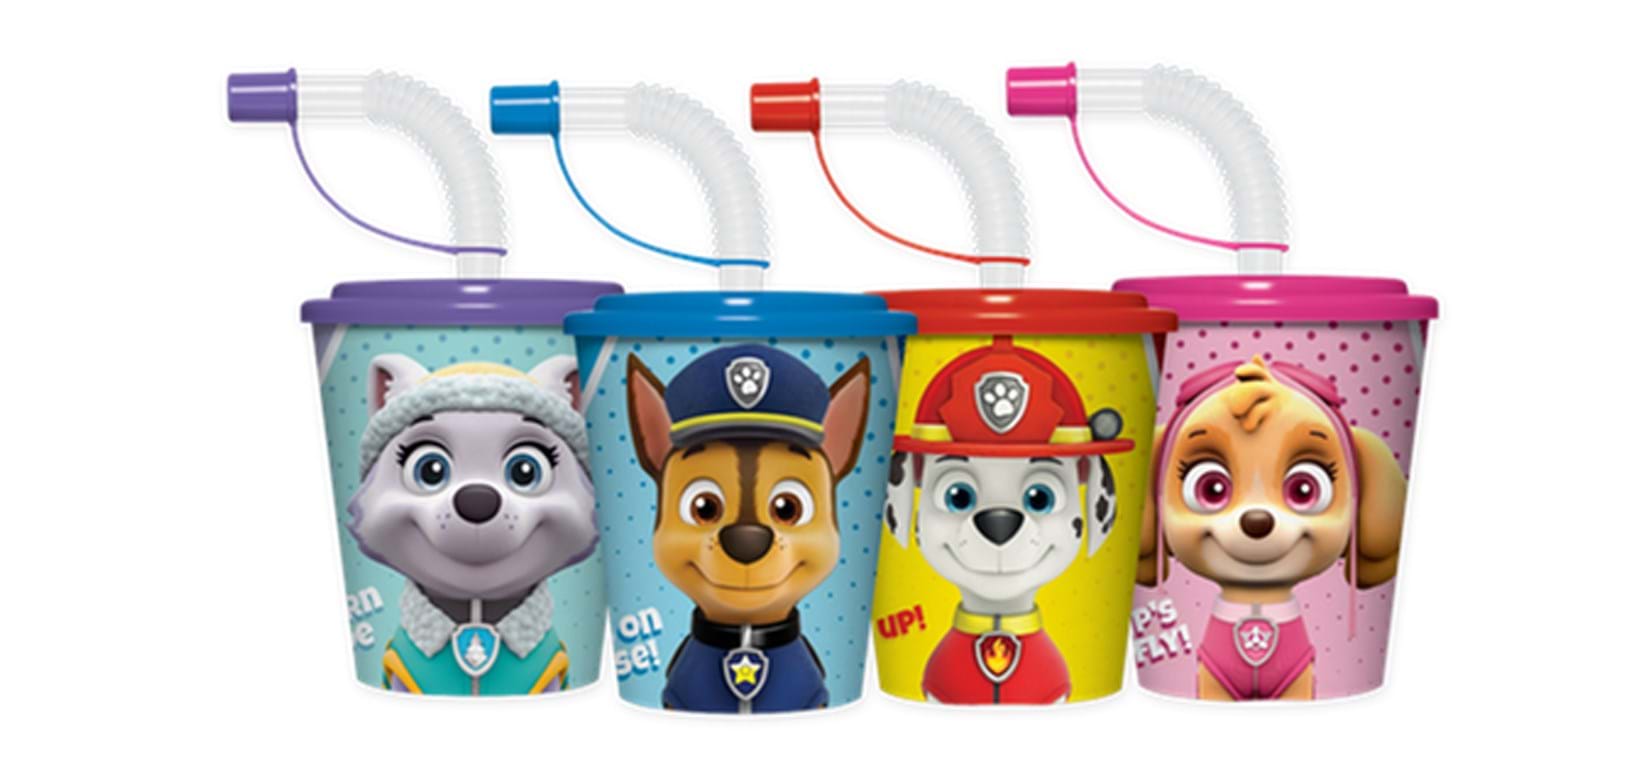 https://www.havenglobal.com/static/uploads/images/paw-patrol-boost-1-wfzdyumtzucm.jpg?height=760&mode=max&upscale=false&width=1642